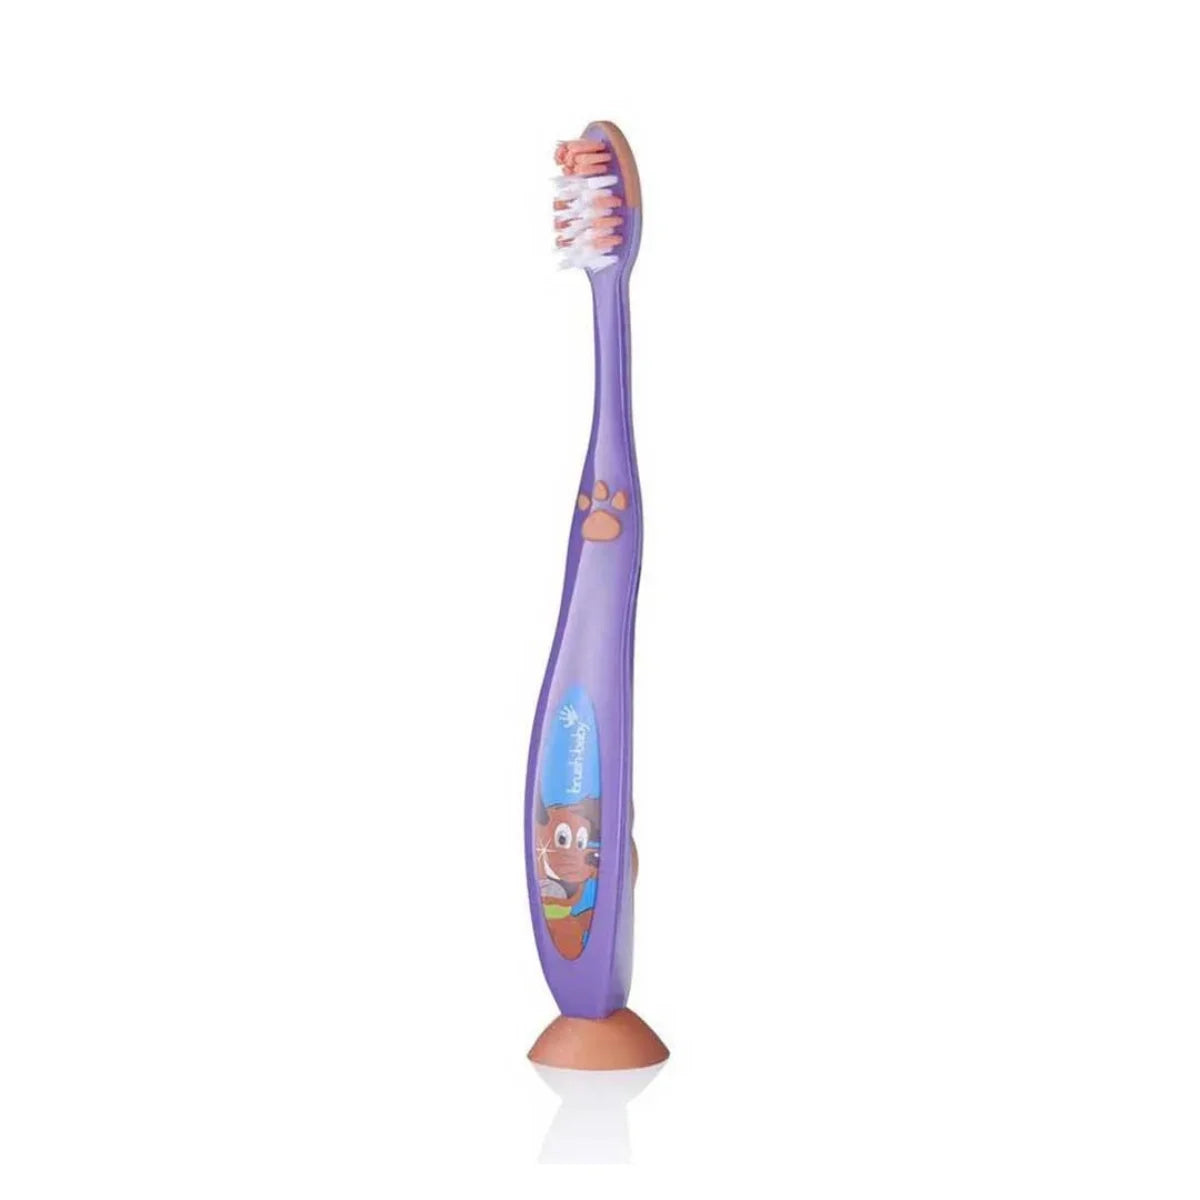 Purple 6 years and older flossbrush bristles toothbrush for children with handle and sucker feet